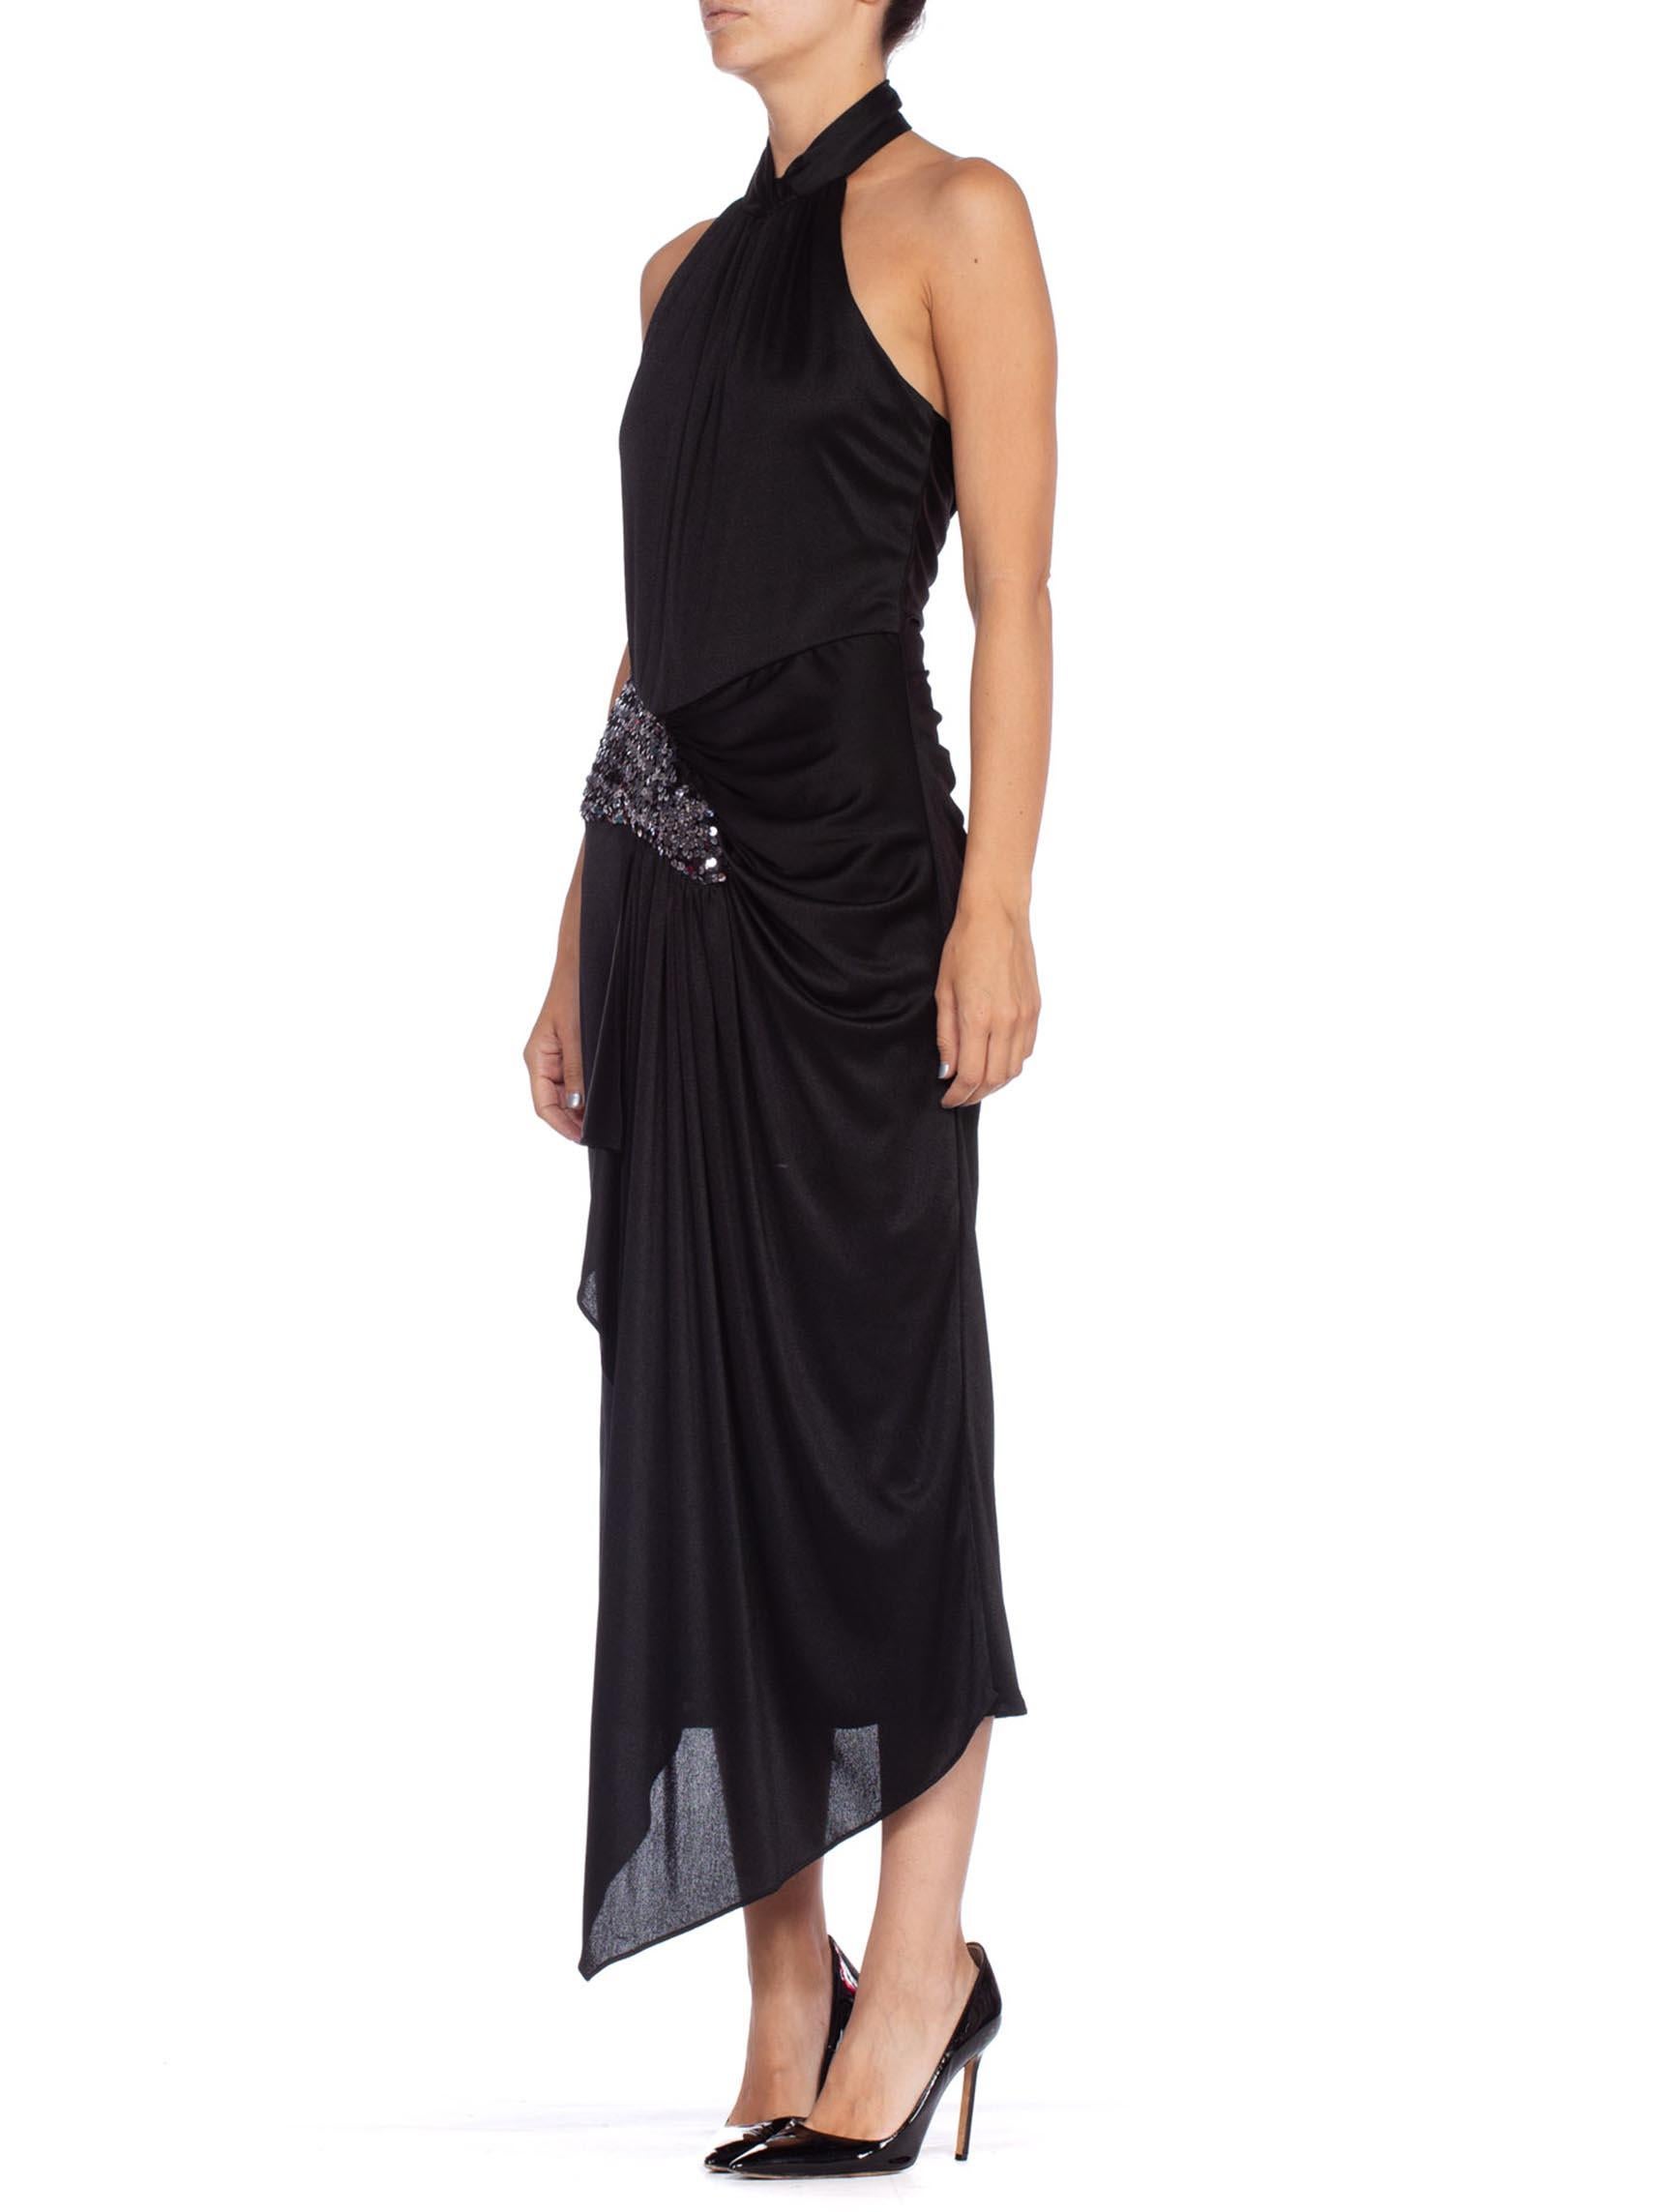 1980'S Black Polyester Jersey Slinky Disco Party Halter Dress With Silver Sequi For Sale 1